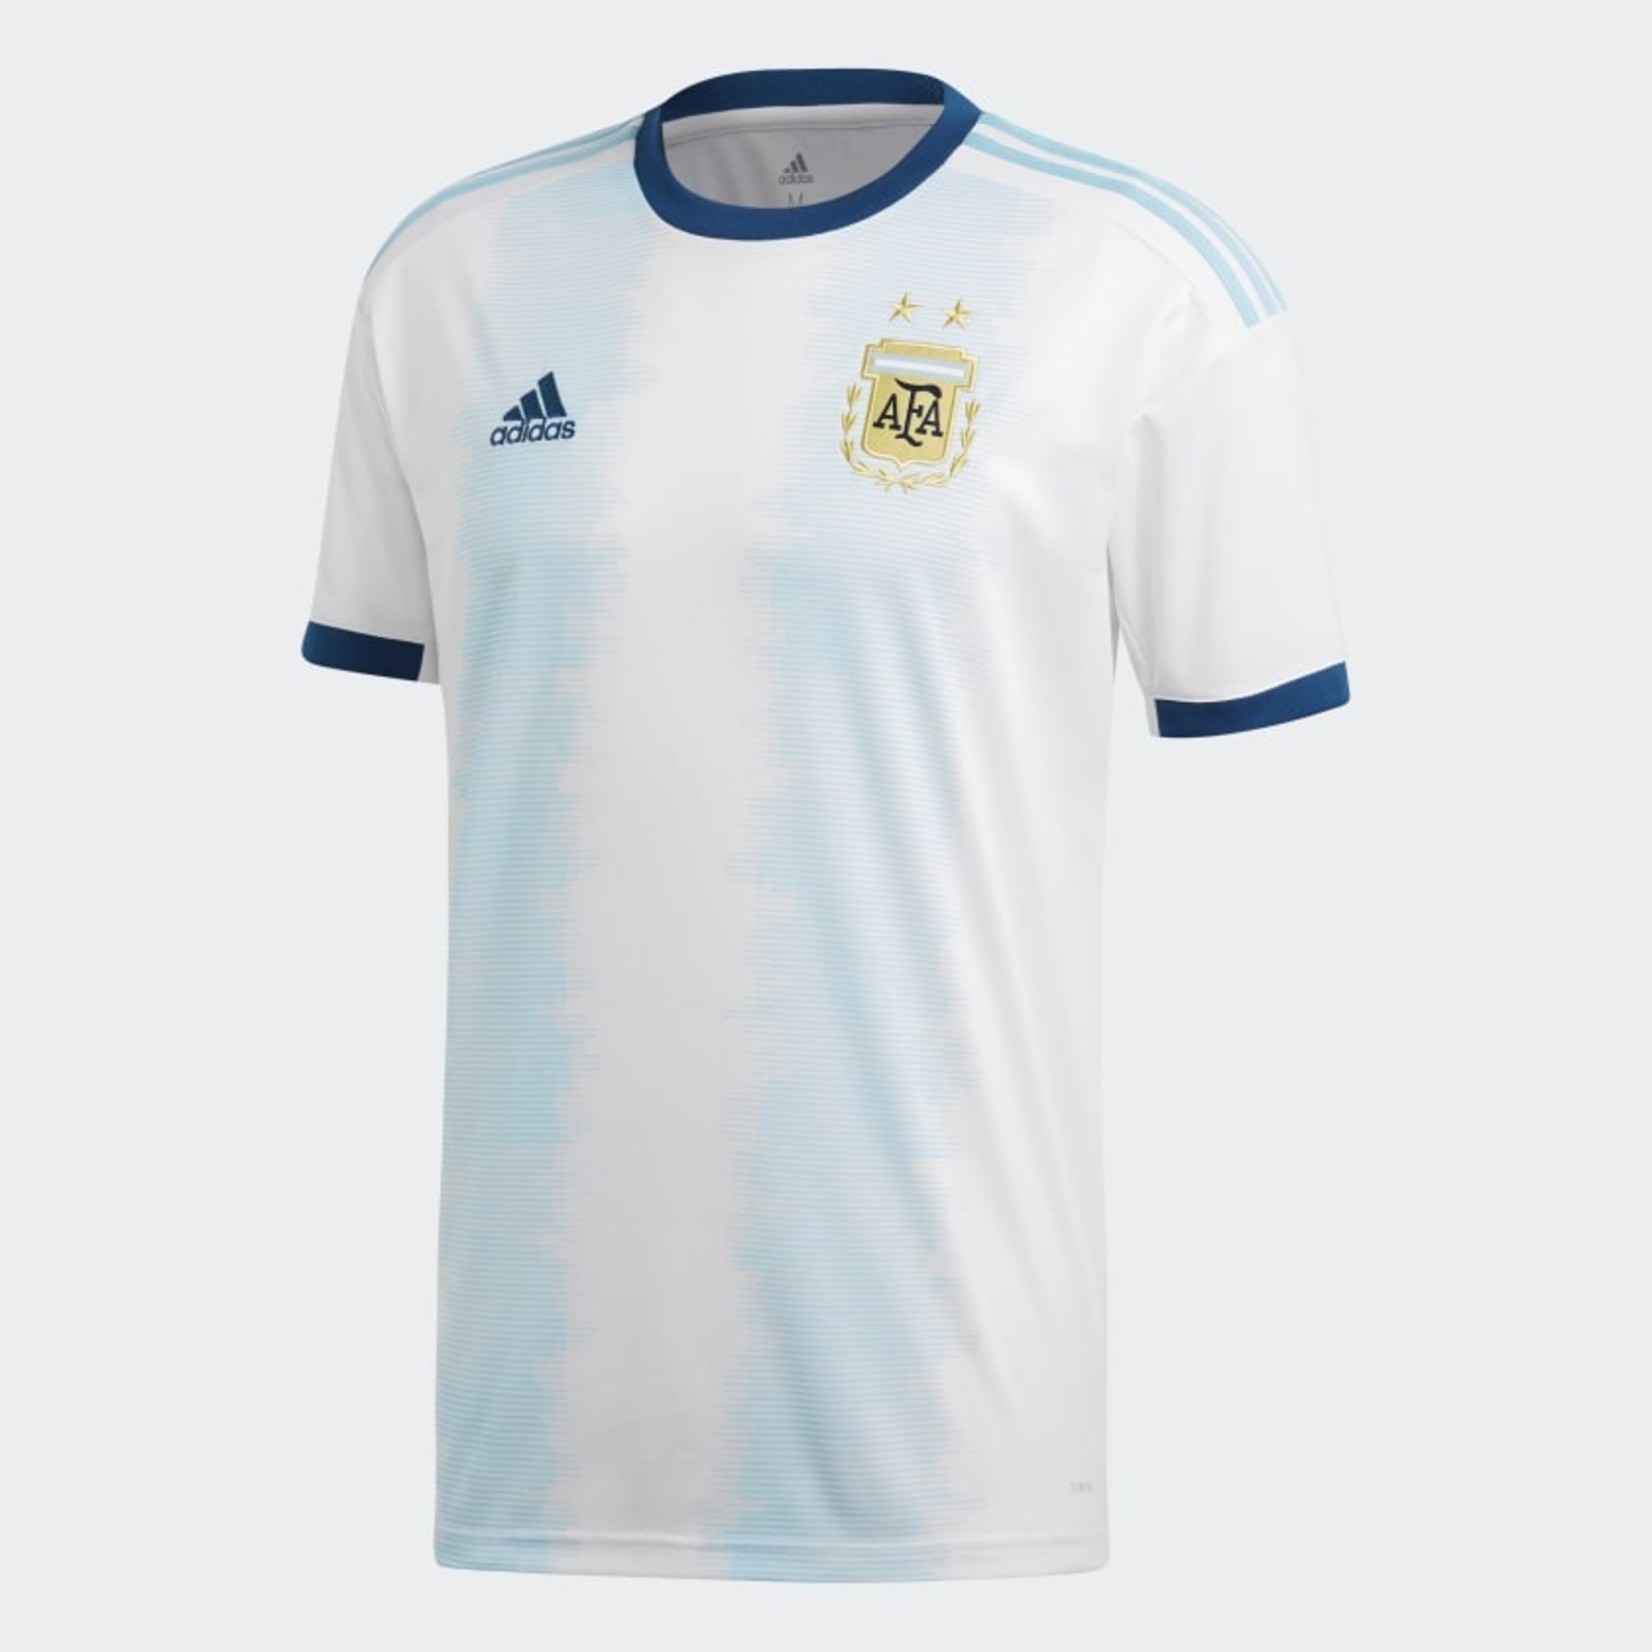 Adidas Argentina 19/20 Home Jersey Adult